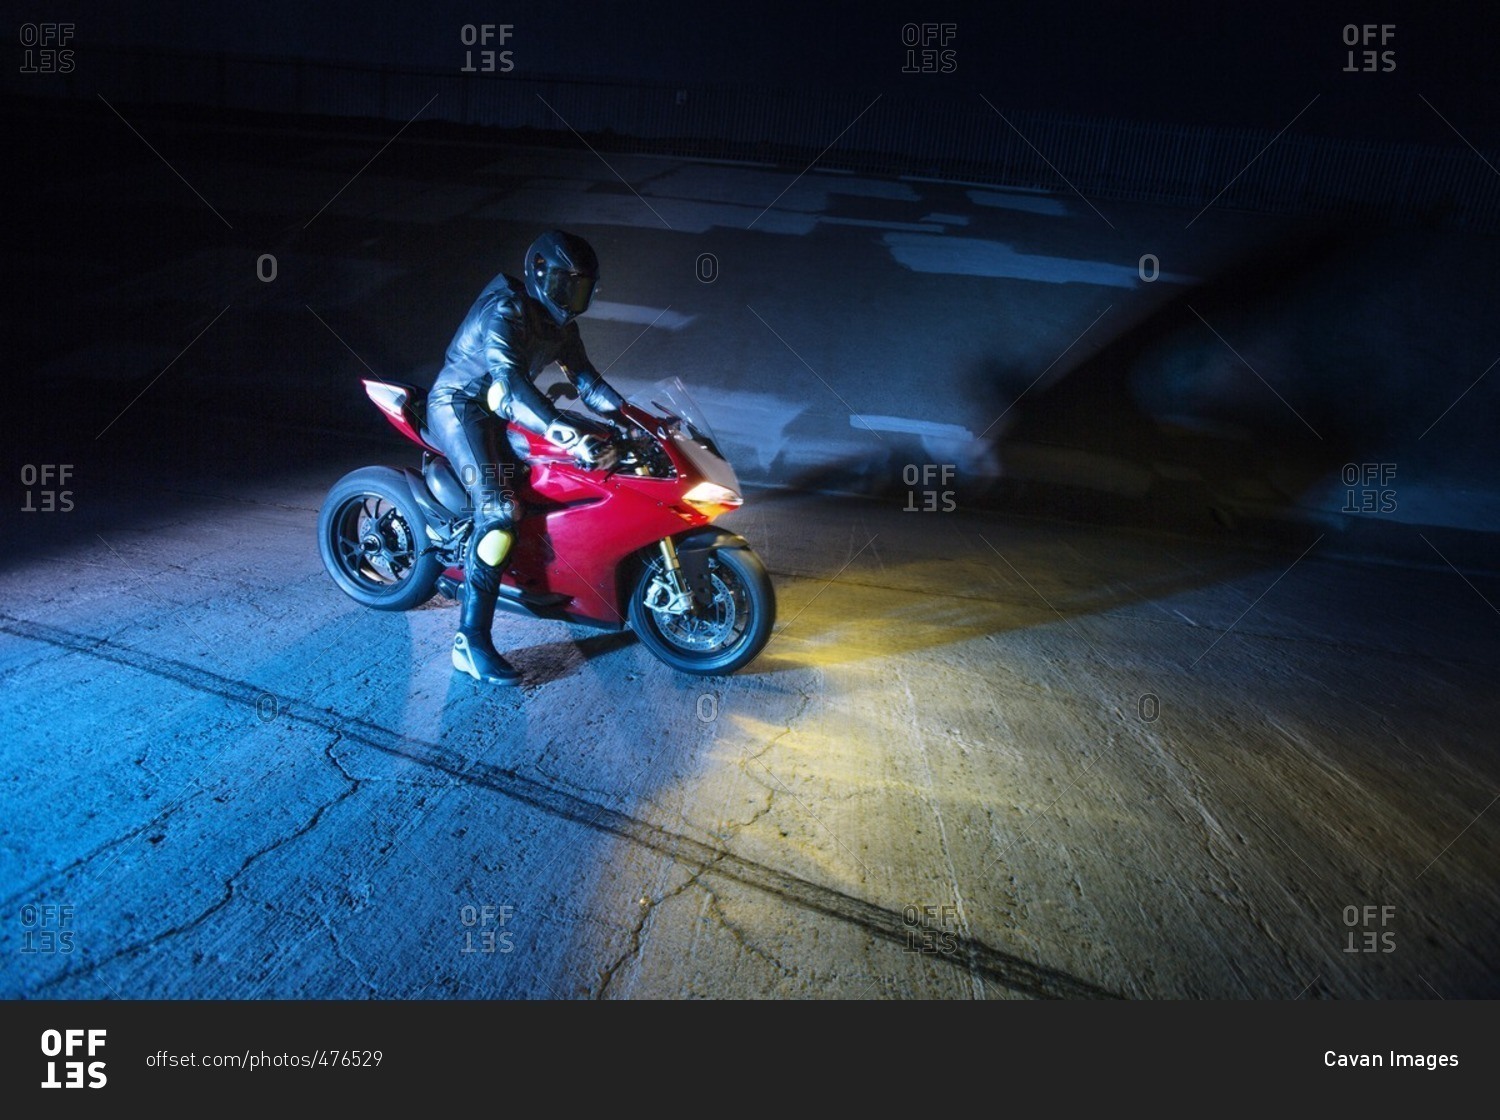 Biker with motorcycle on road at night